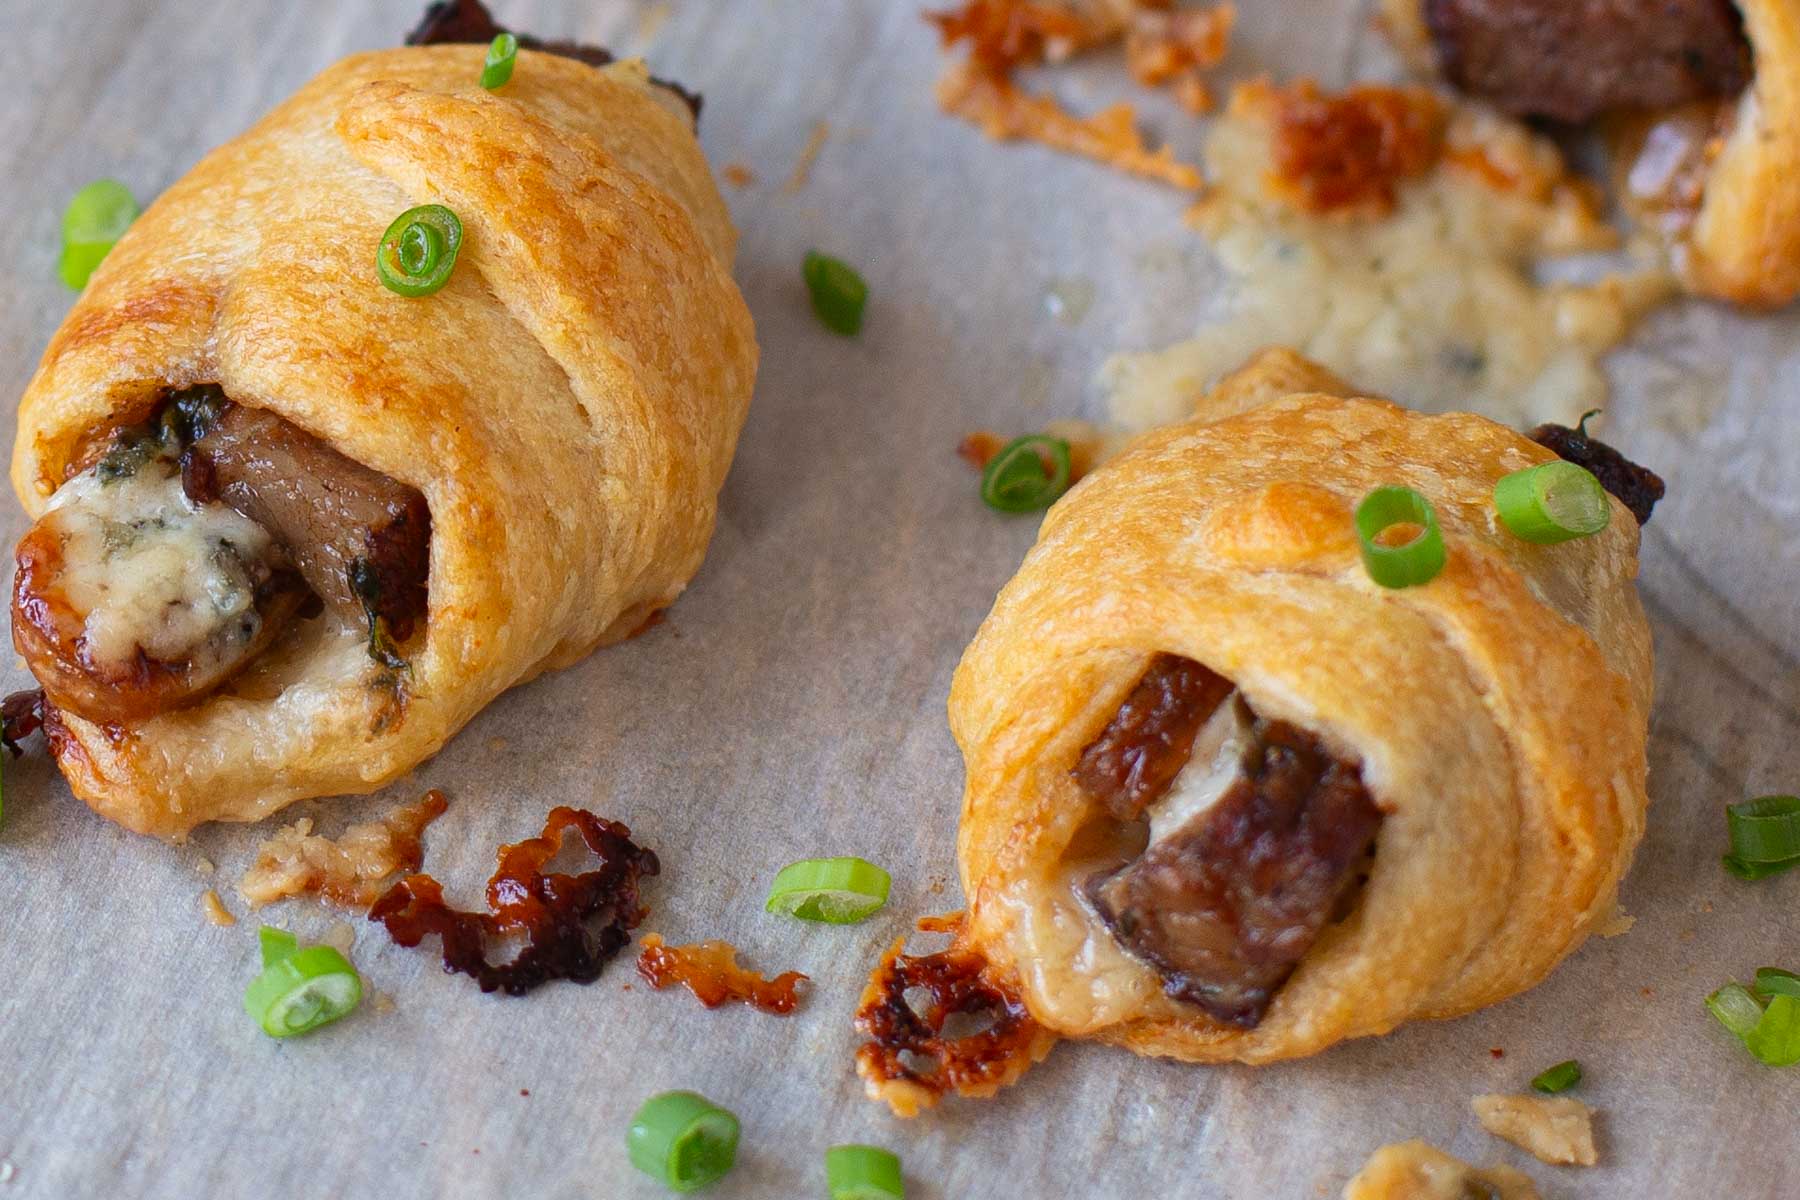 Baked steak and blue cheese bites wrapped in crescent rolls.